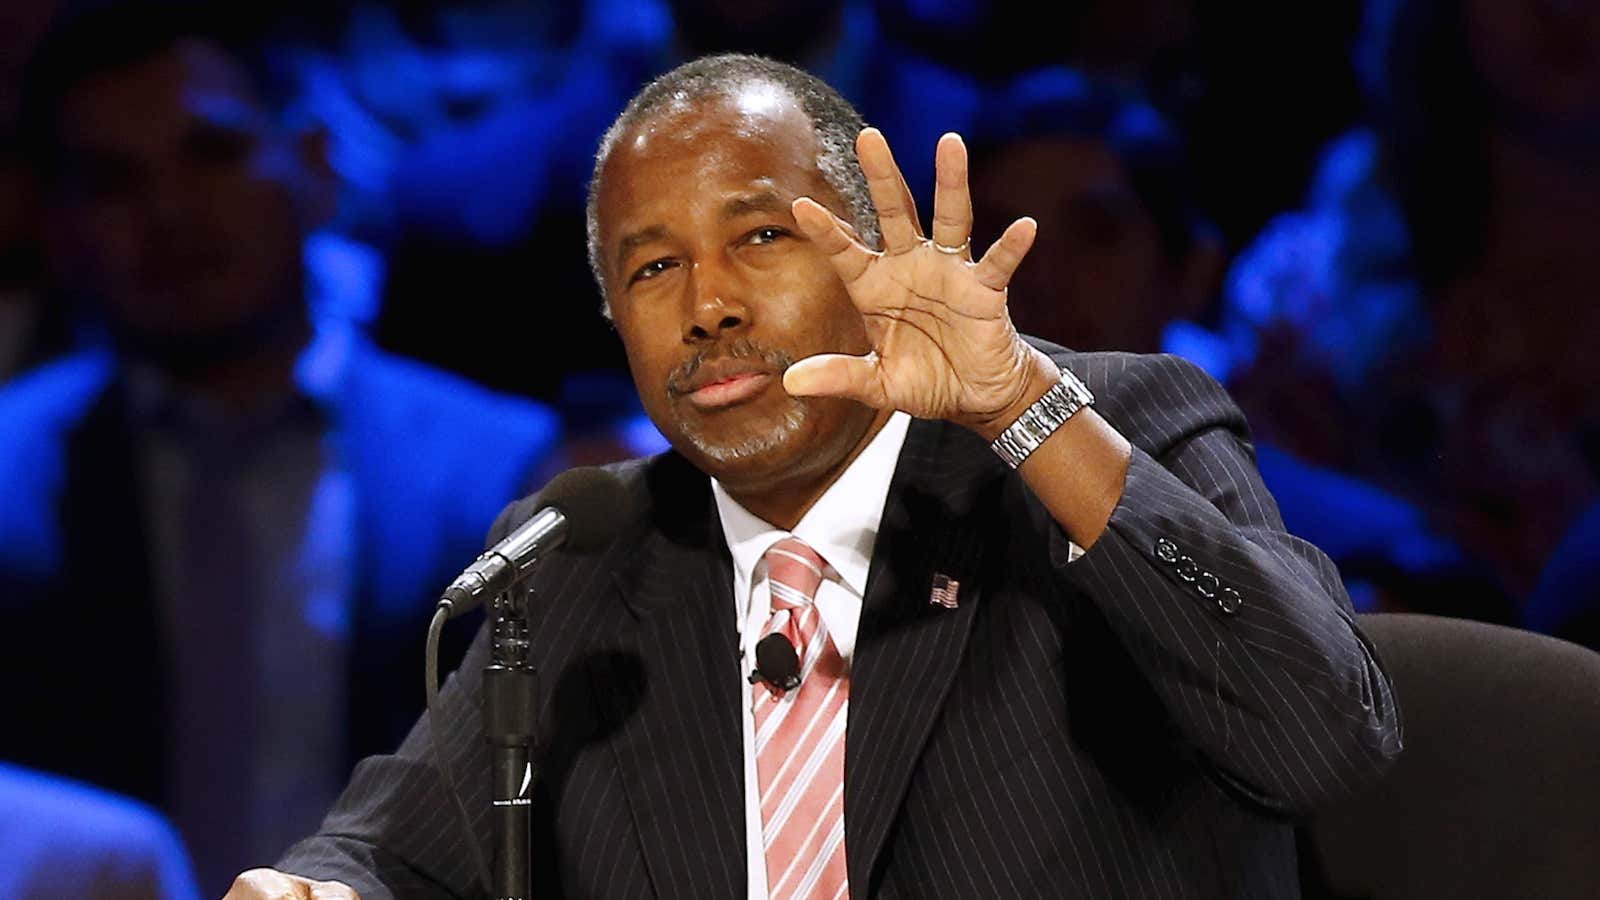 Ben Carson is the most boring person running for president—why is he so popular?